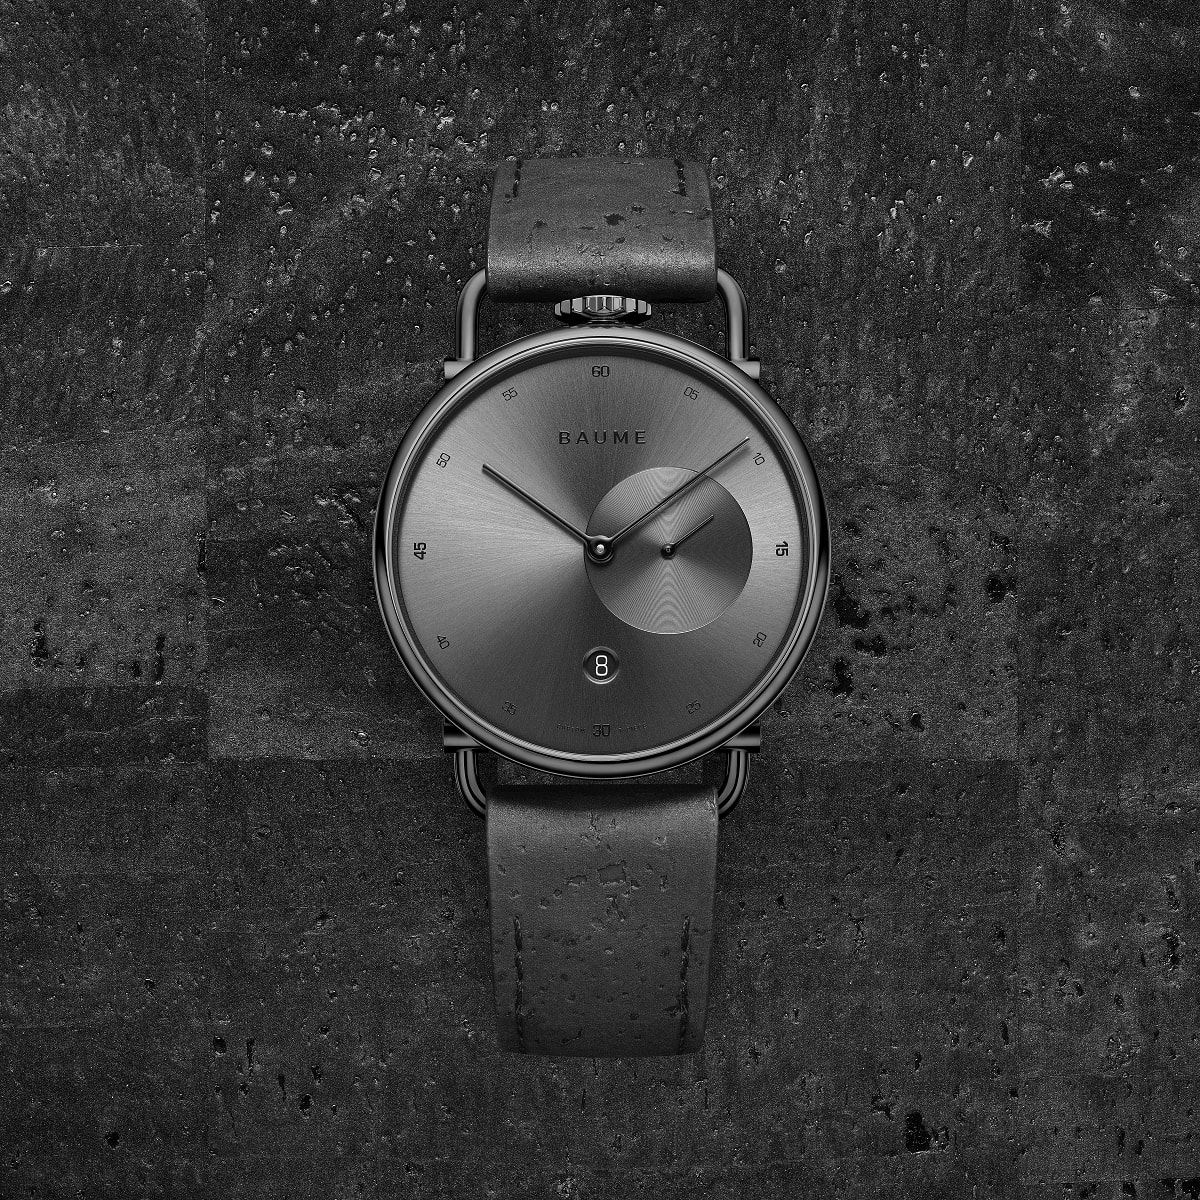 Introducing Baume: The Latest Entry-Level Watch Brand From Richemont